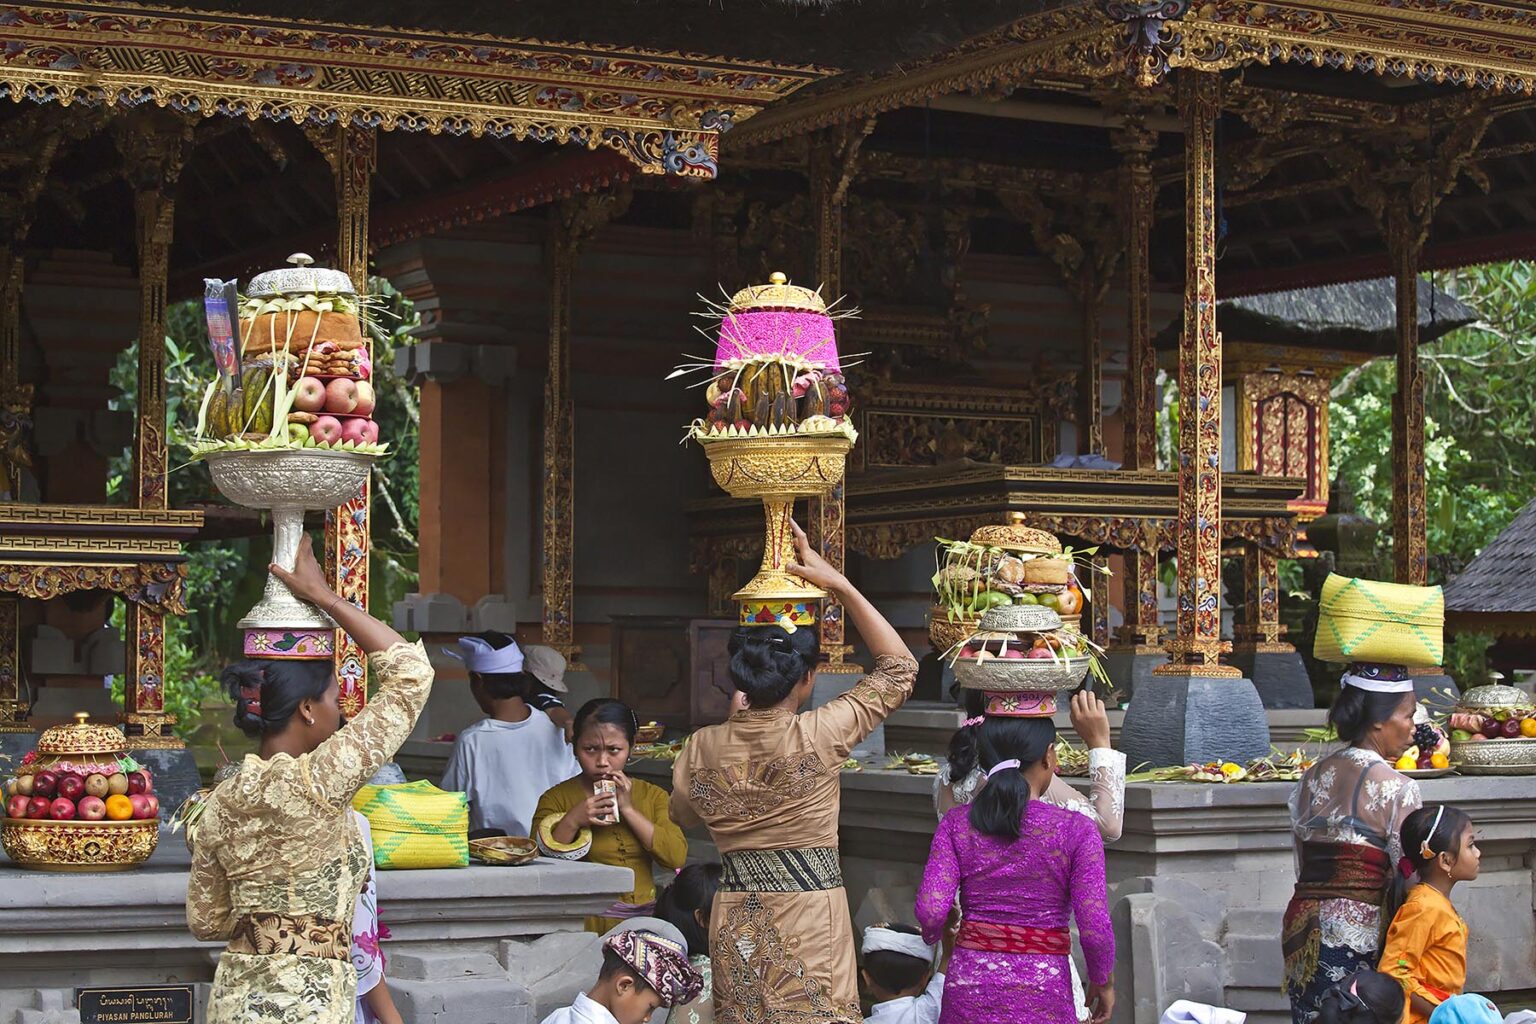 Women bring offerings of fruit, flowers and pastries to the PURA TIRTA EMPUL TEMPLE COMPLEX during the GALUNGAN FESTIVAL - TAMPAKSIRING, BALI, INDONESIA